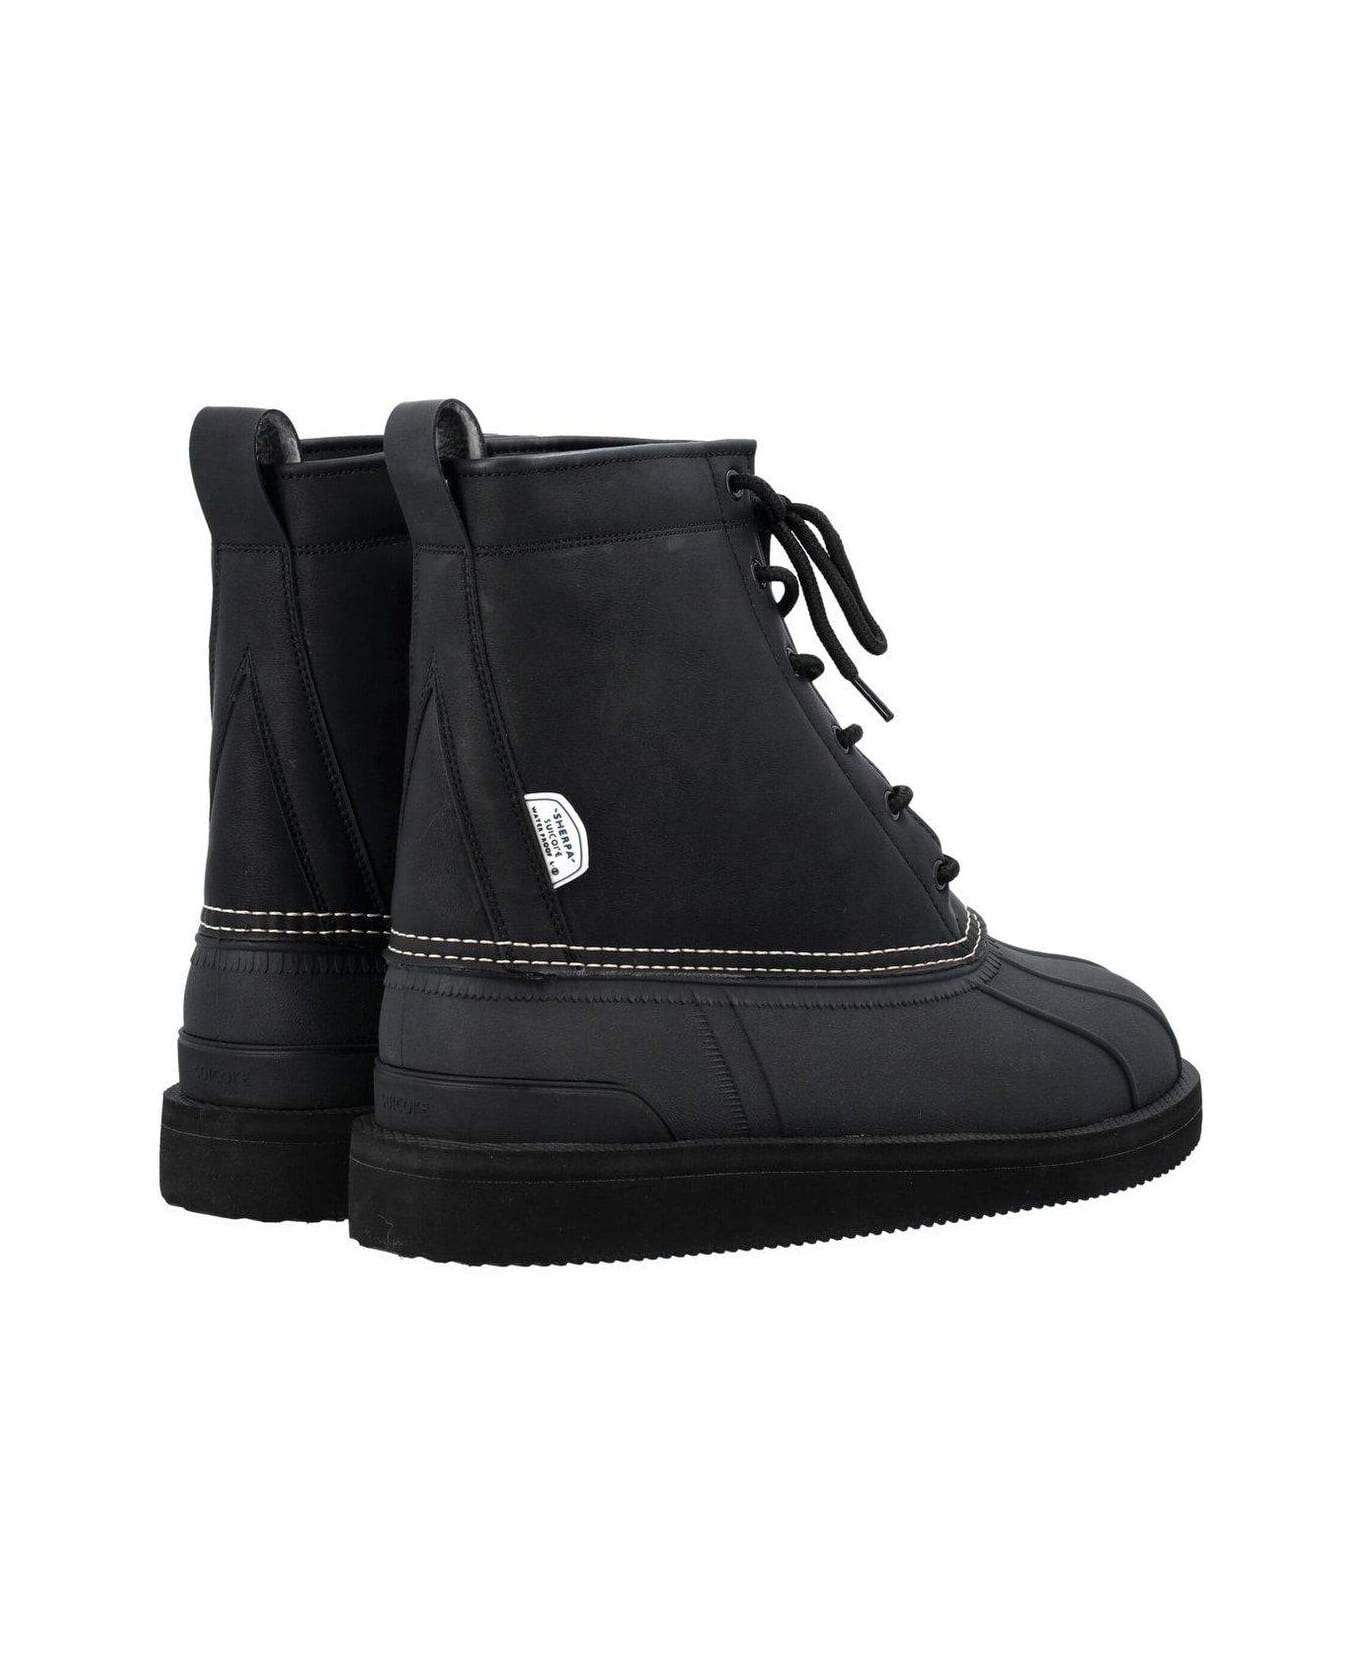 SUICOKE Alal Lace-up Round Toe Boots - Black ブーツ